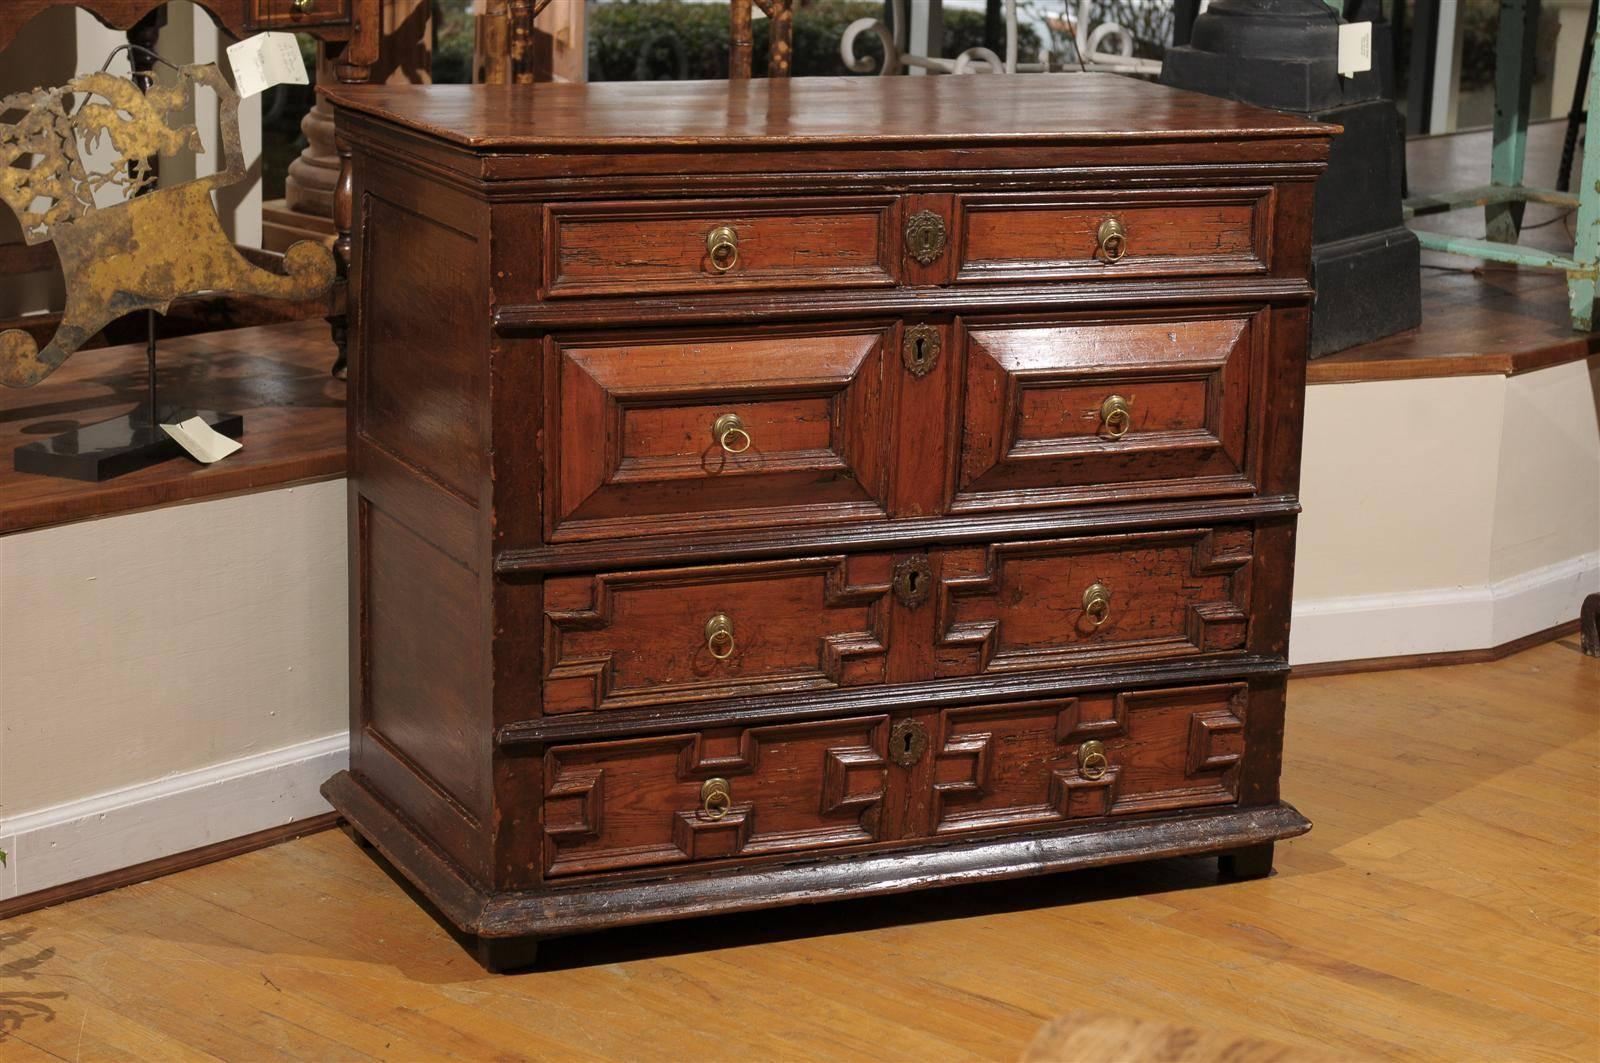 This chest is very unusual because most Jacobean chest are in oak and this is pine. It has four drawers. Each has different carved motifs which is typical of the style. The hardware is original to the chest. The color is very warm and it would fit